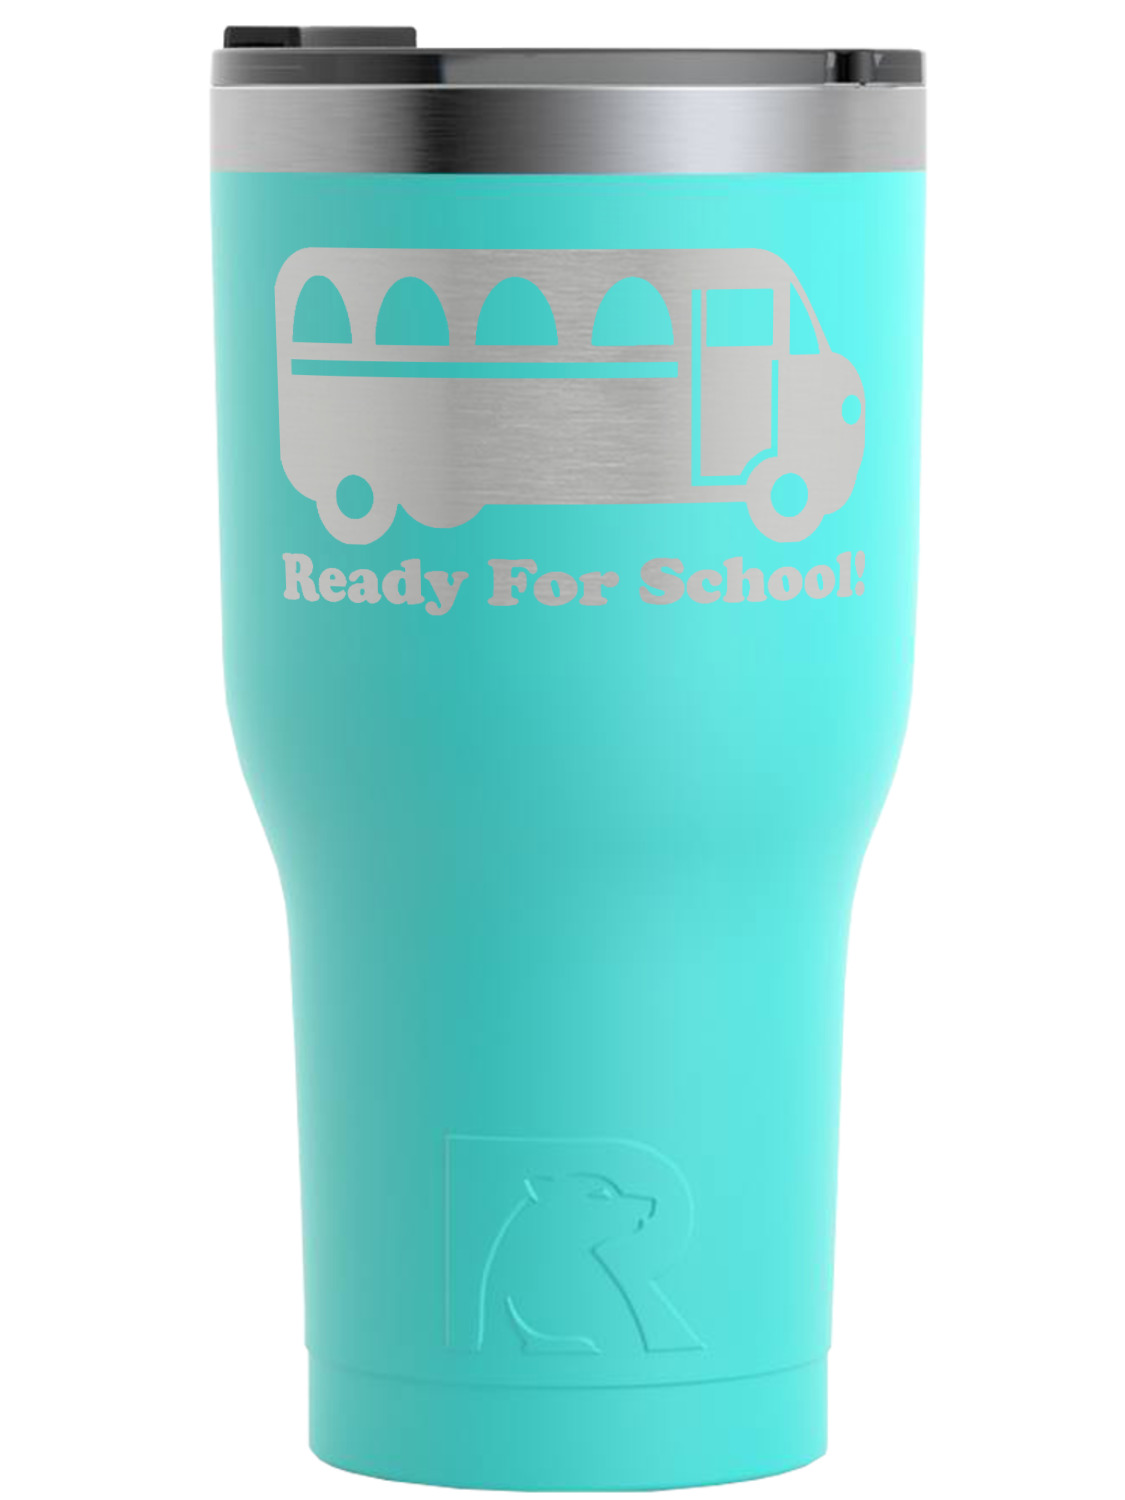 https://www.youcustomizeit.com/common/MAKE/1055730/School-Bus-Teal-RTIC-Tumbler-Front-3.jpg?lm=1665683784